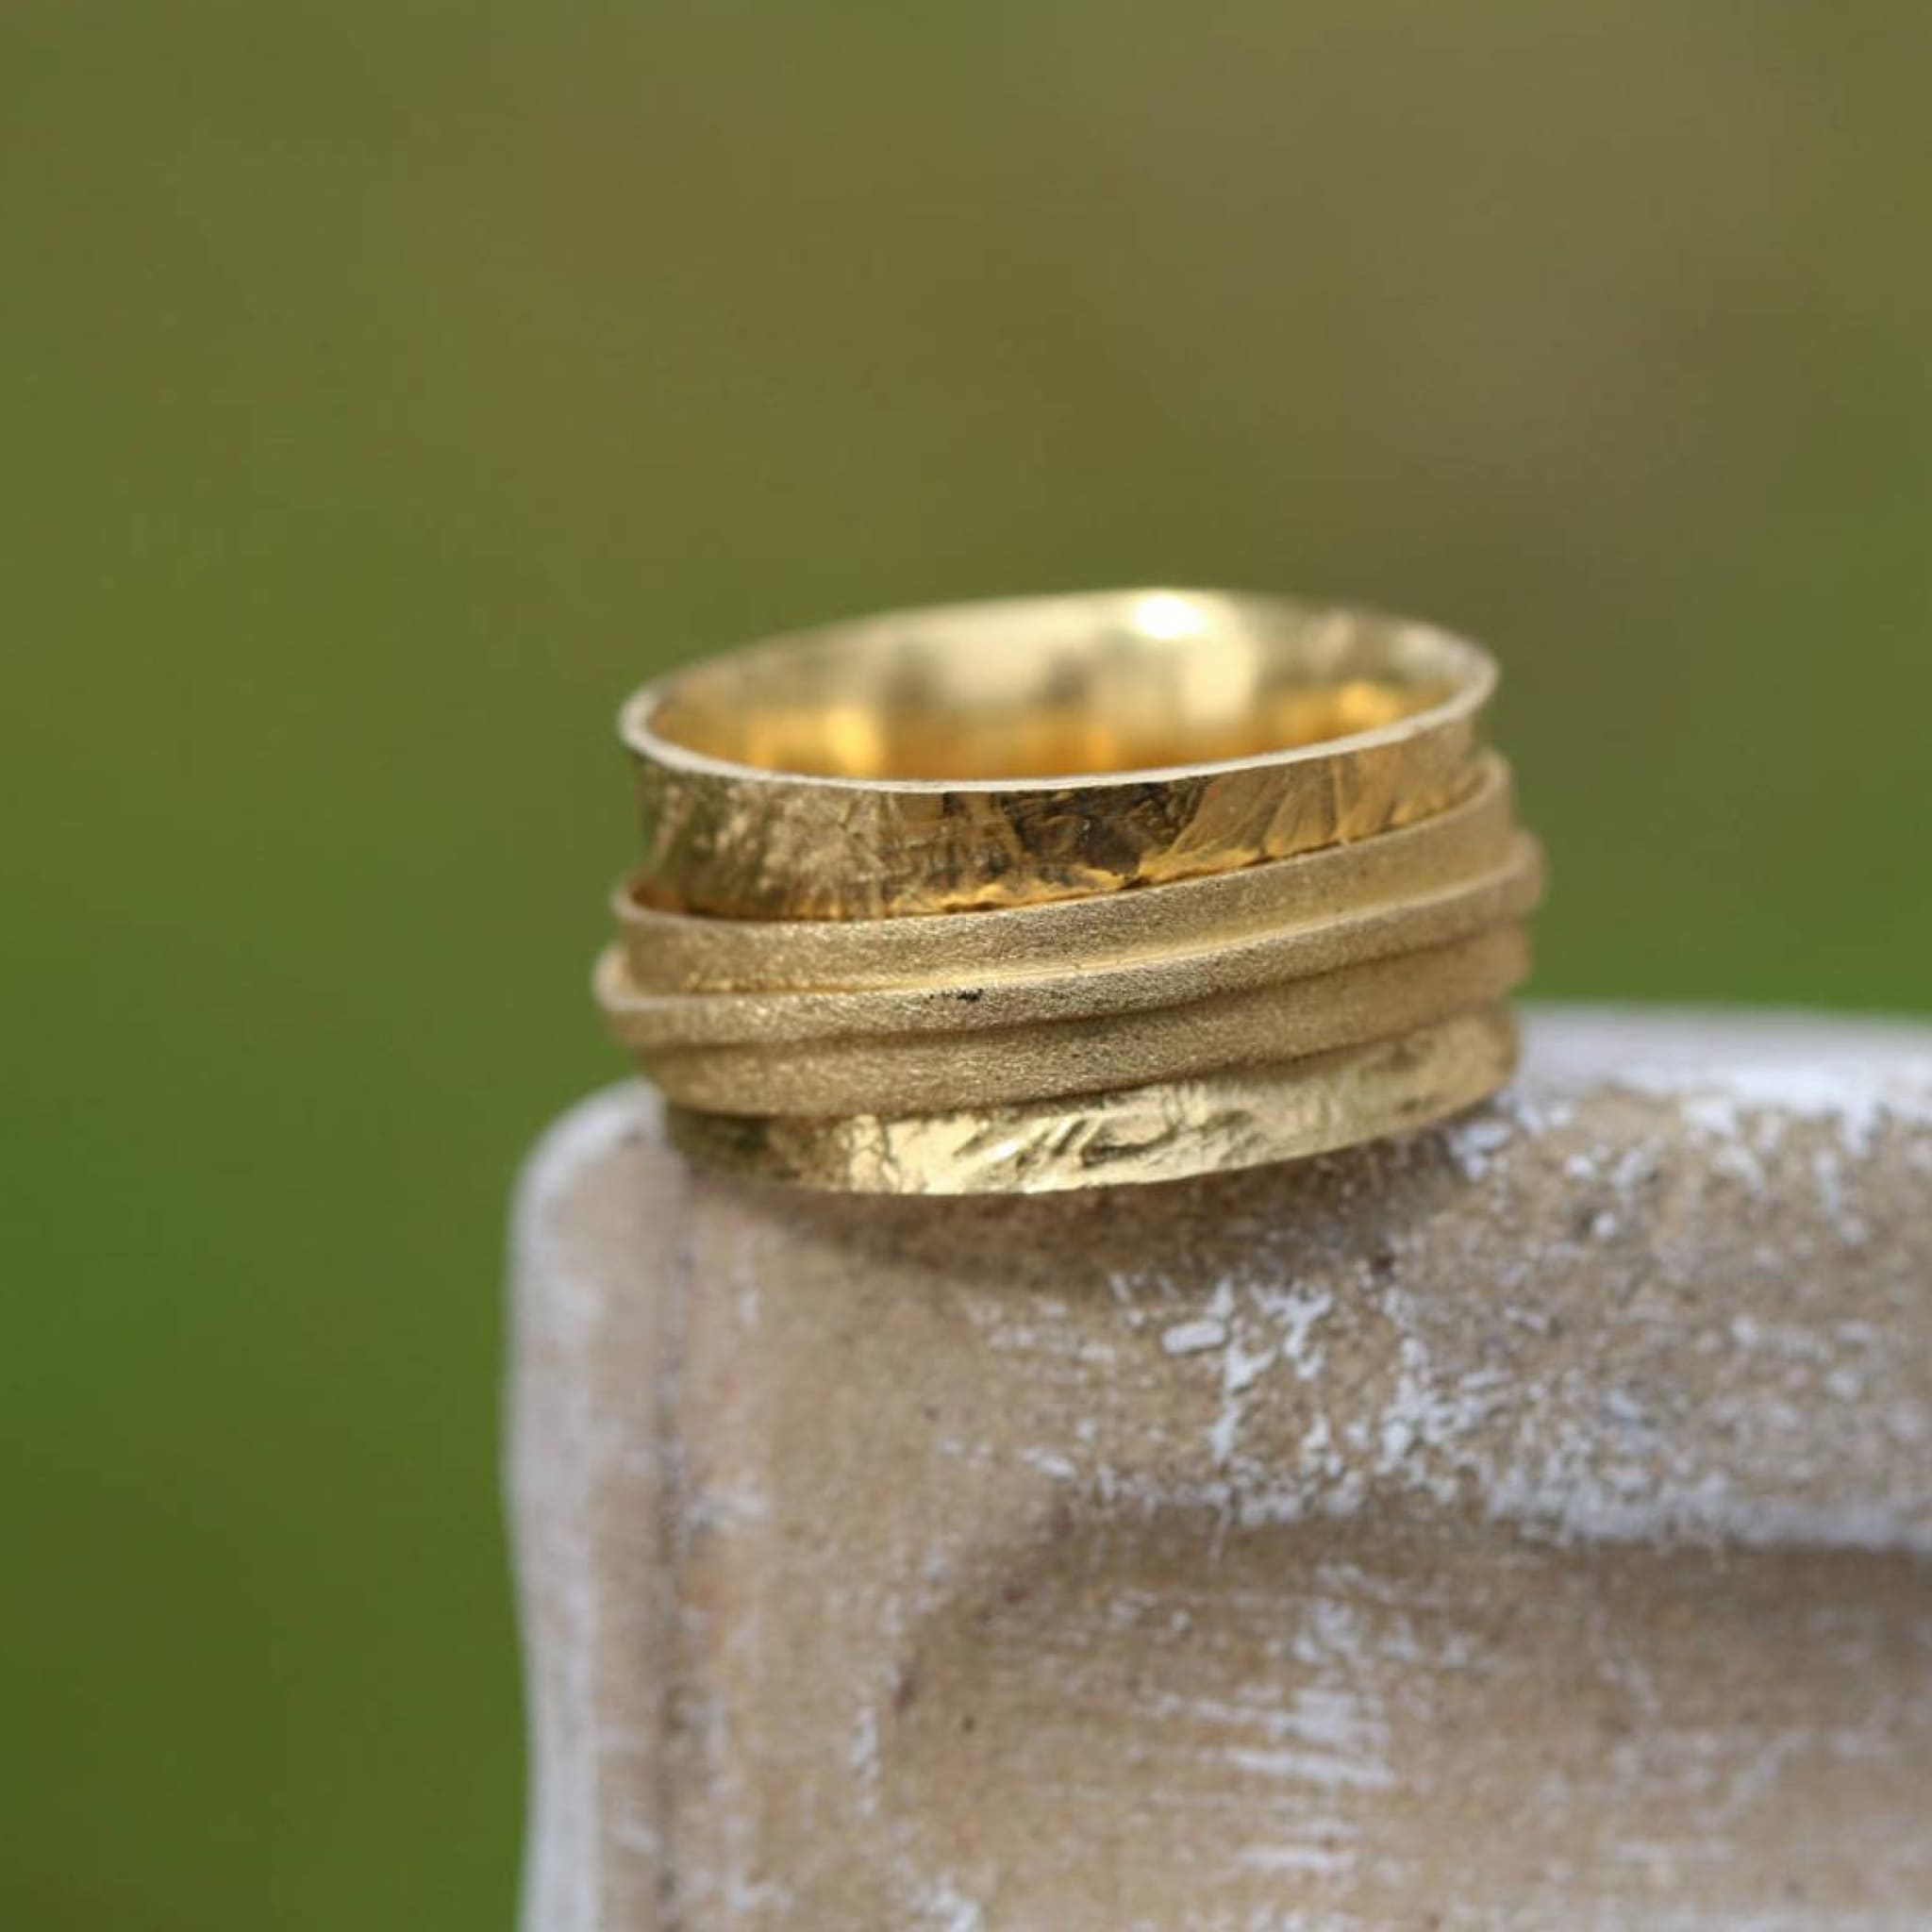 Detailed Gold Textured Ring Jewelry